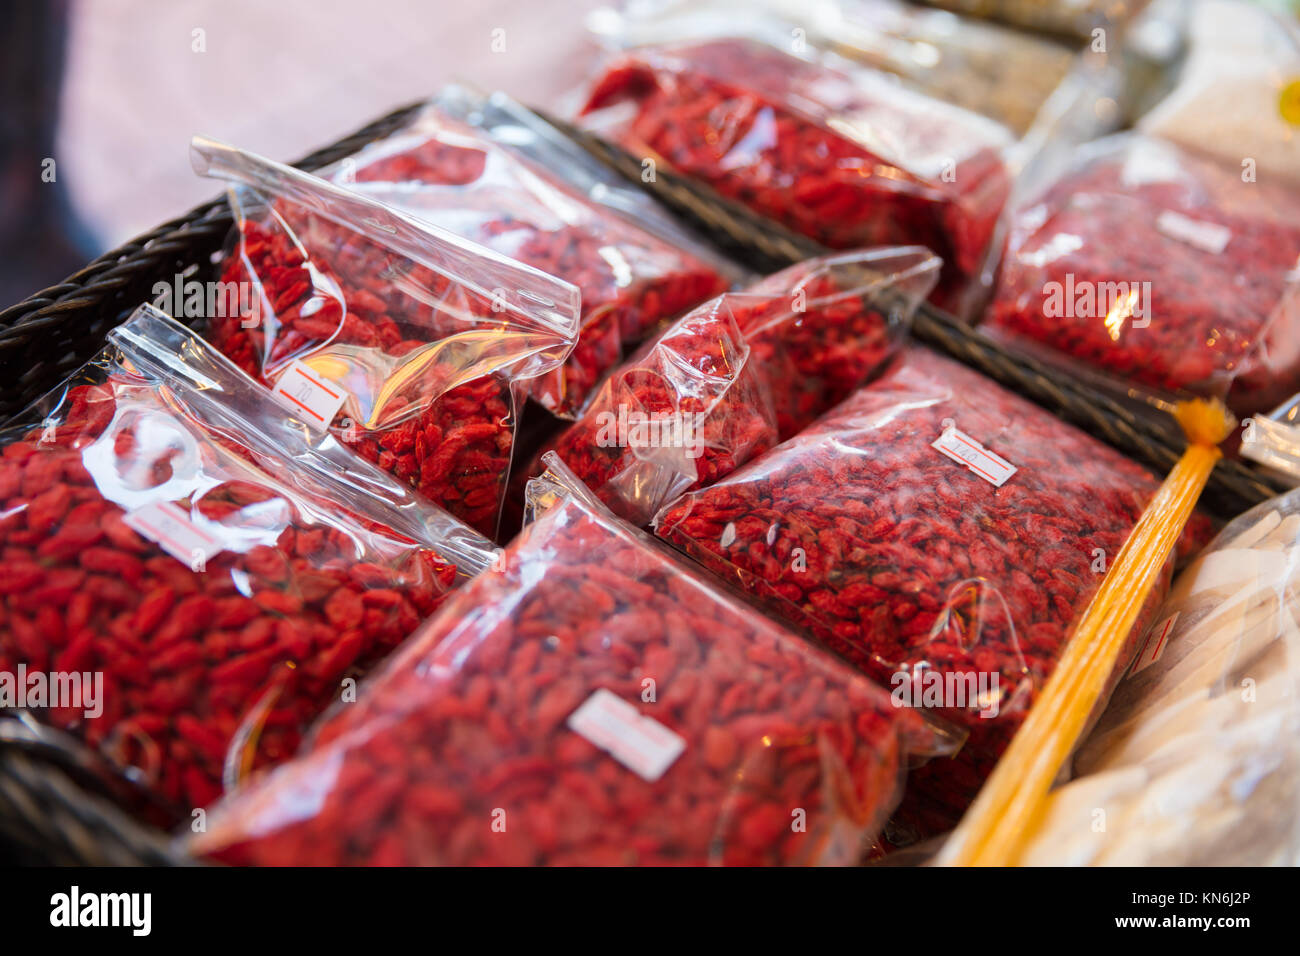 Dried Goji Berries In Plastic Bags At Local Market Stock Photo